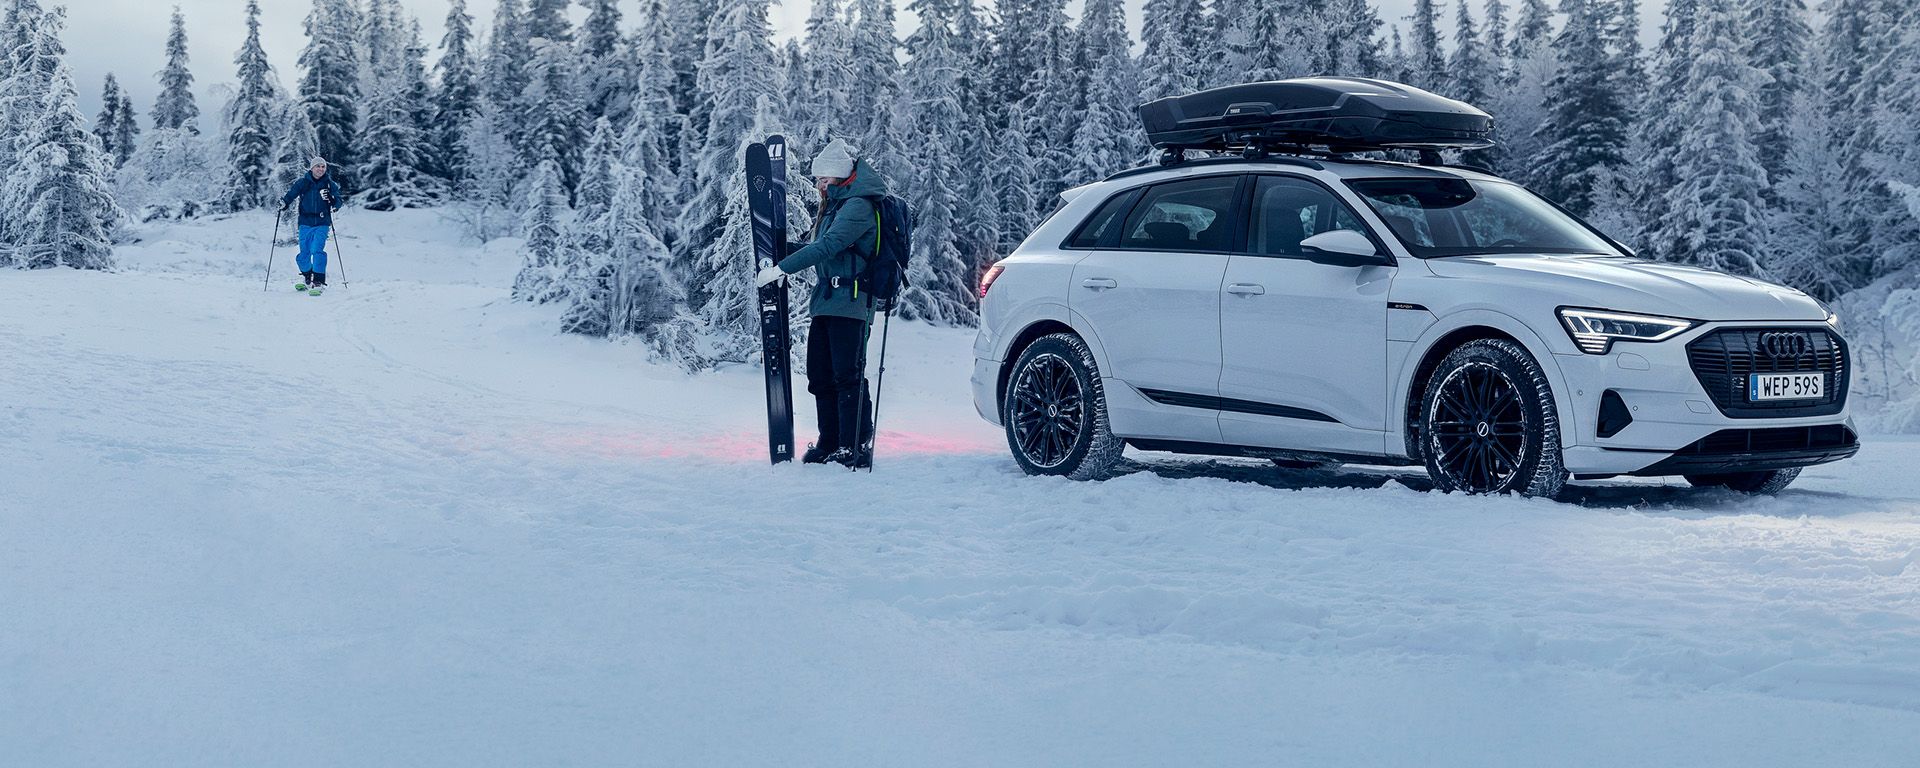 A car is parked by a snowy forest with a Thule Vector roof box, and skiers stand beside it.